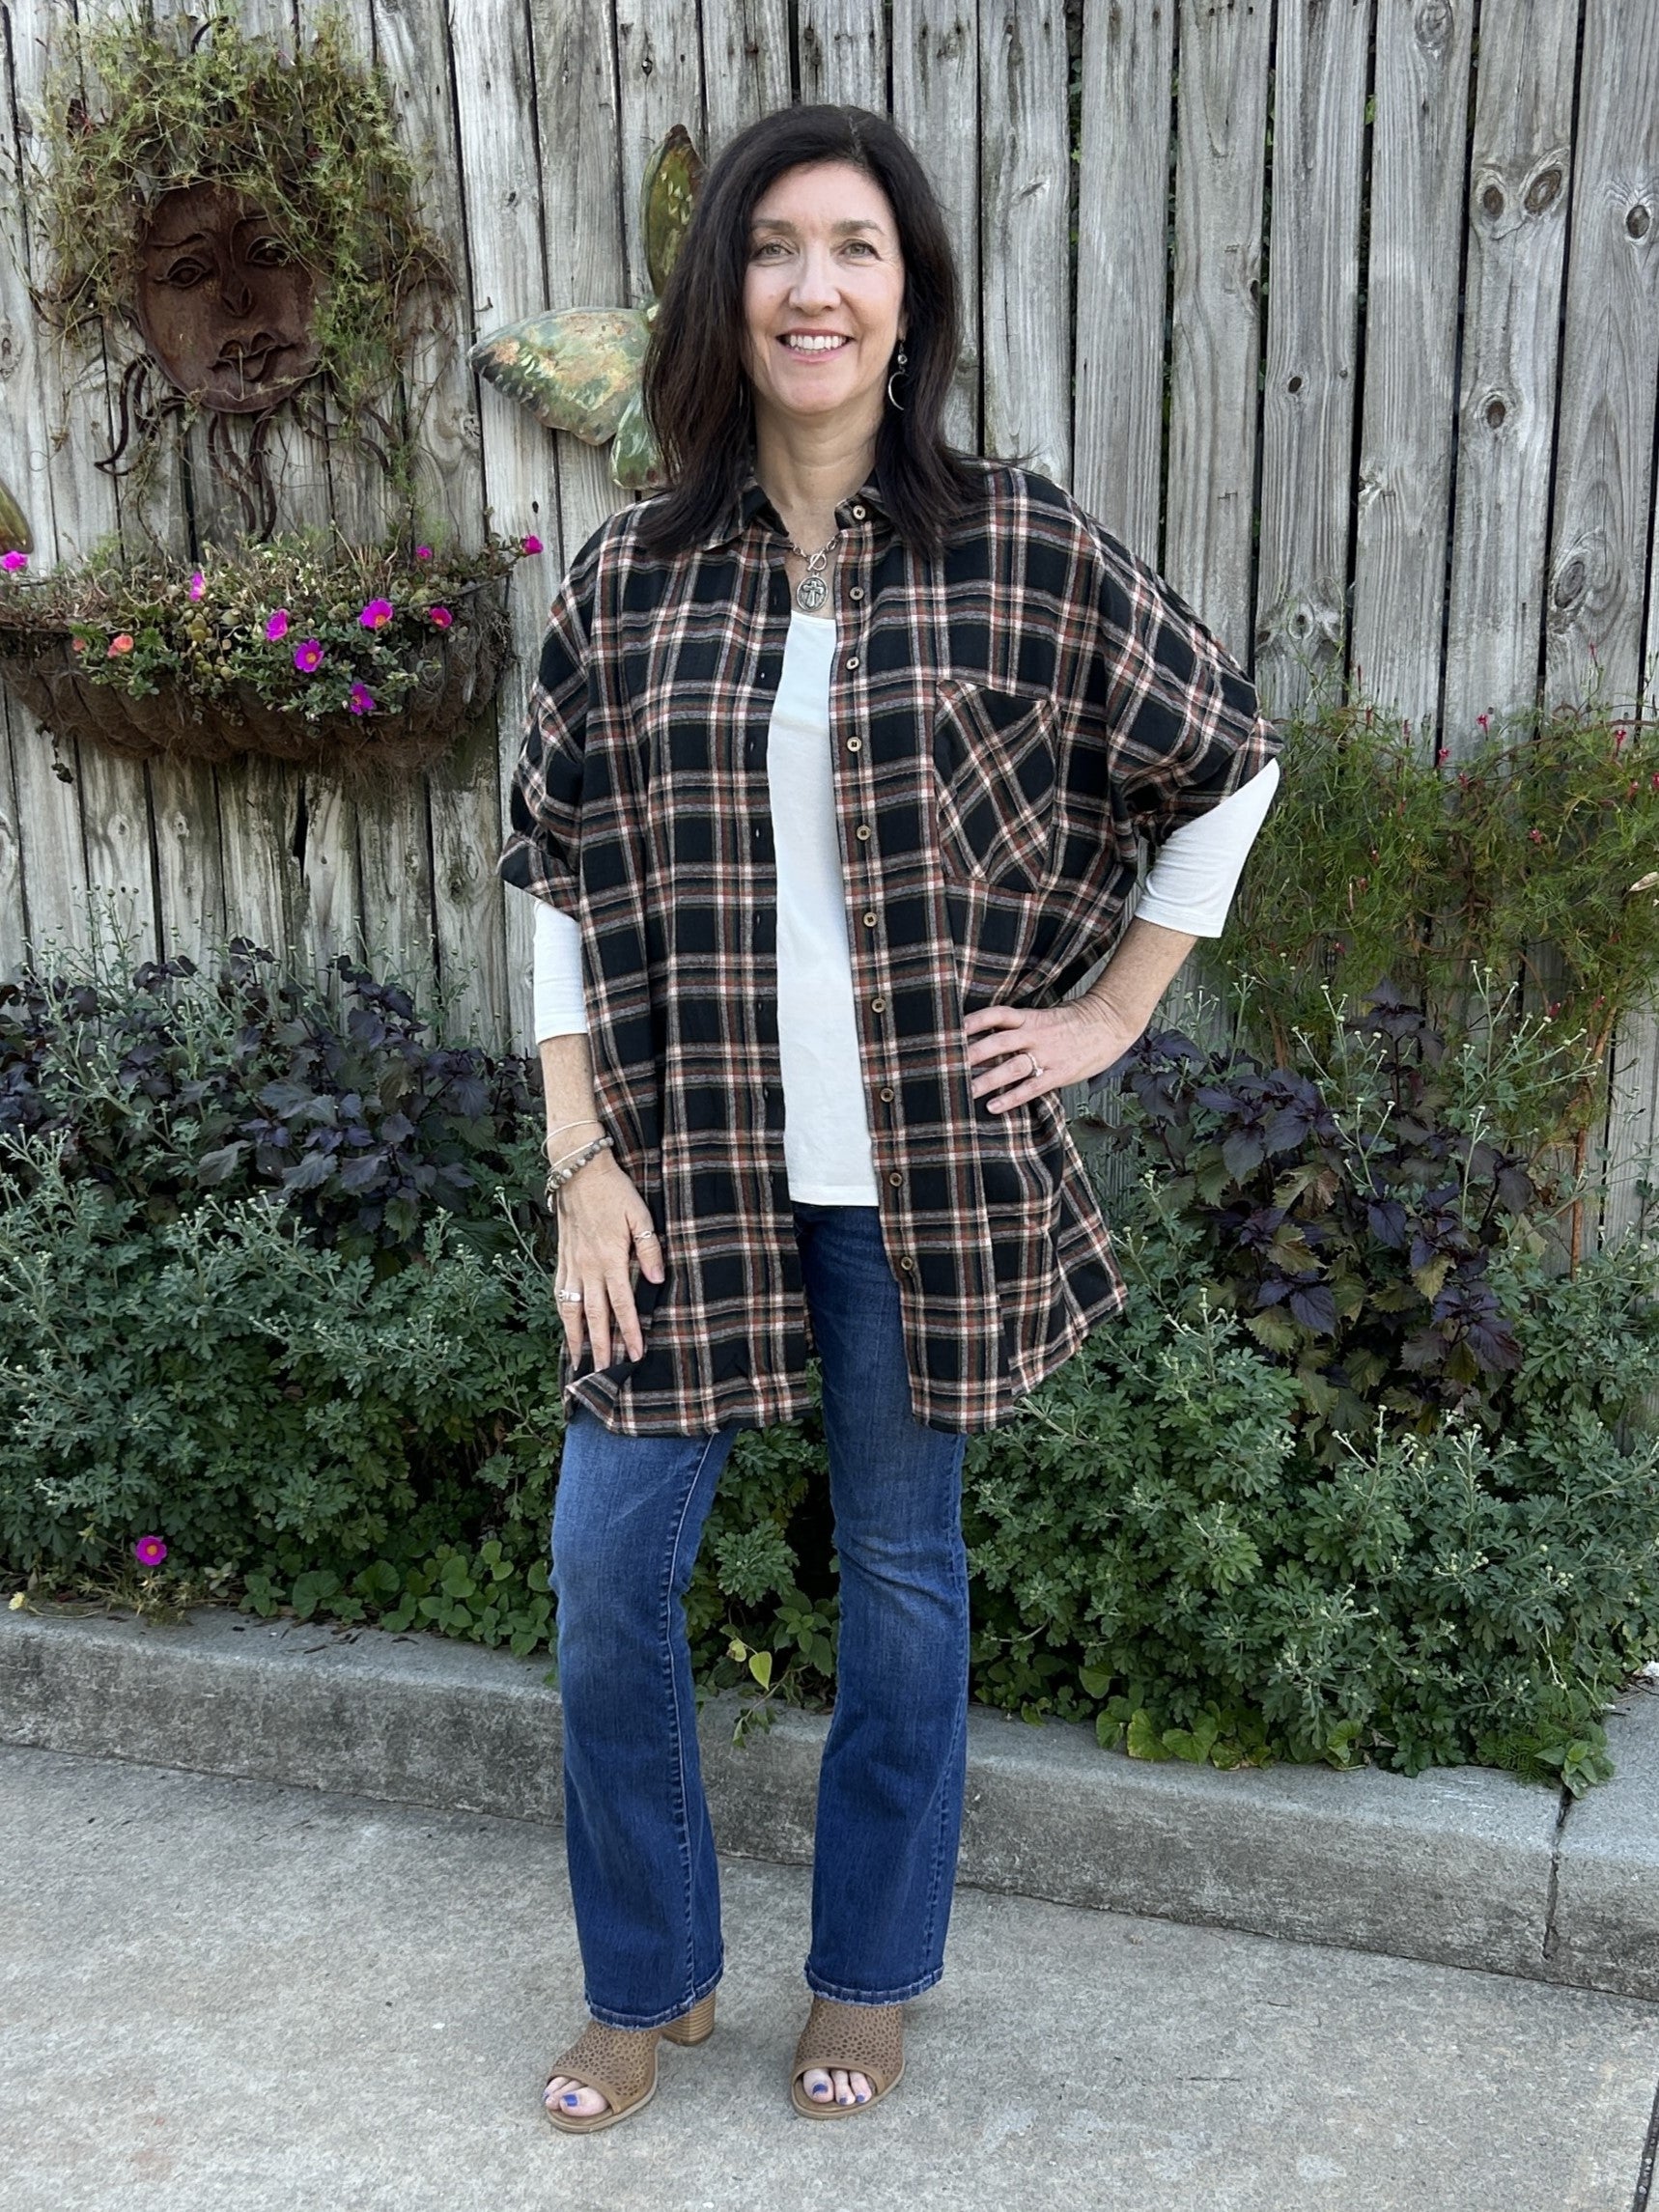 Stay stylish and comfortable in this chic Button Up Flannel Short Sleeve Dress/Shacket. With a flattering collared neckline, classic plaid design in black, rust, and beige, and off the shoulder cuffed short sleeves, it's sure to become an instant favorite. Wear is as is or paired with leggings or jeans. It's too cute!  Material: 60% Polyester / 40% Cotton  Care Instructions: Hand wash cold water , line dry